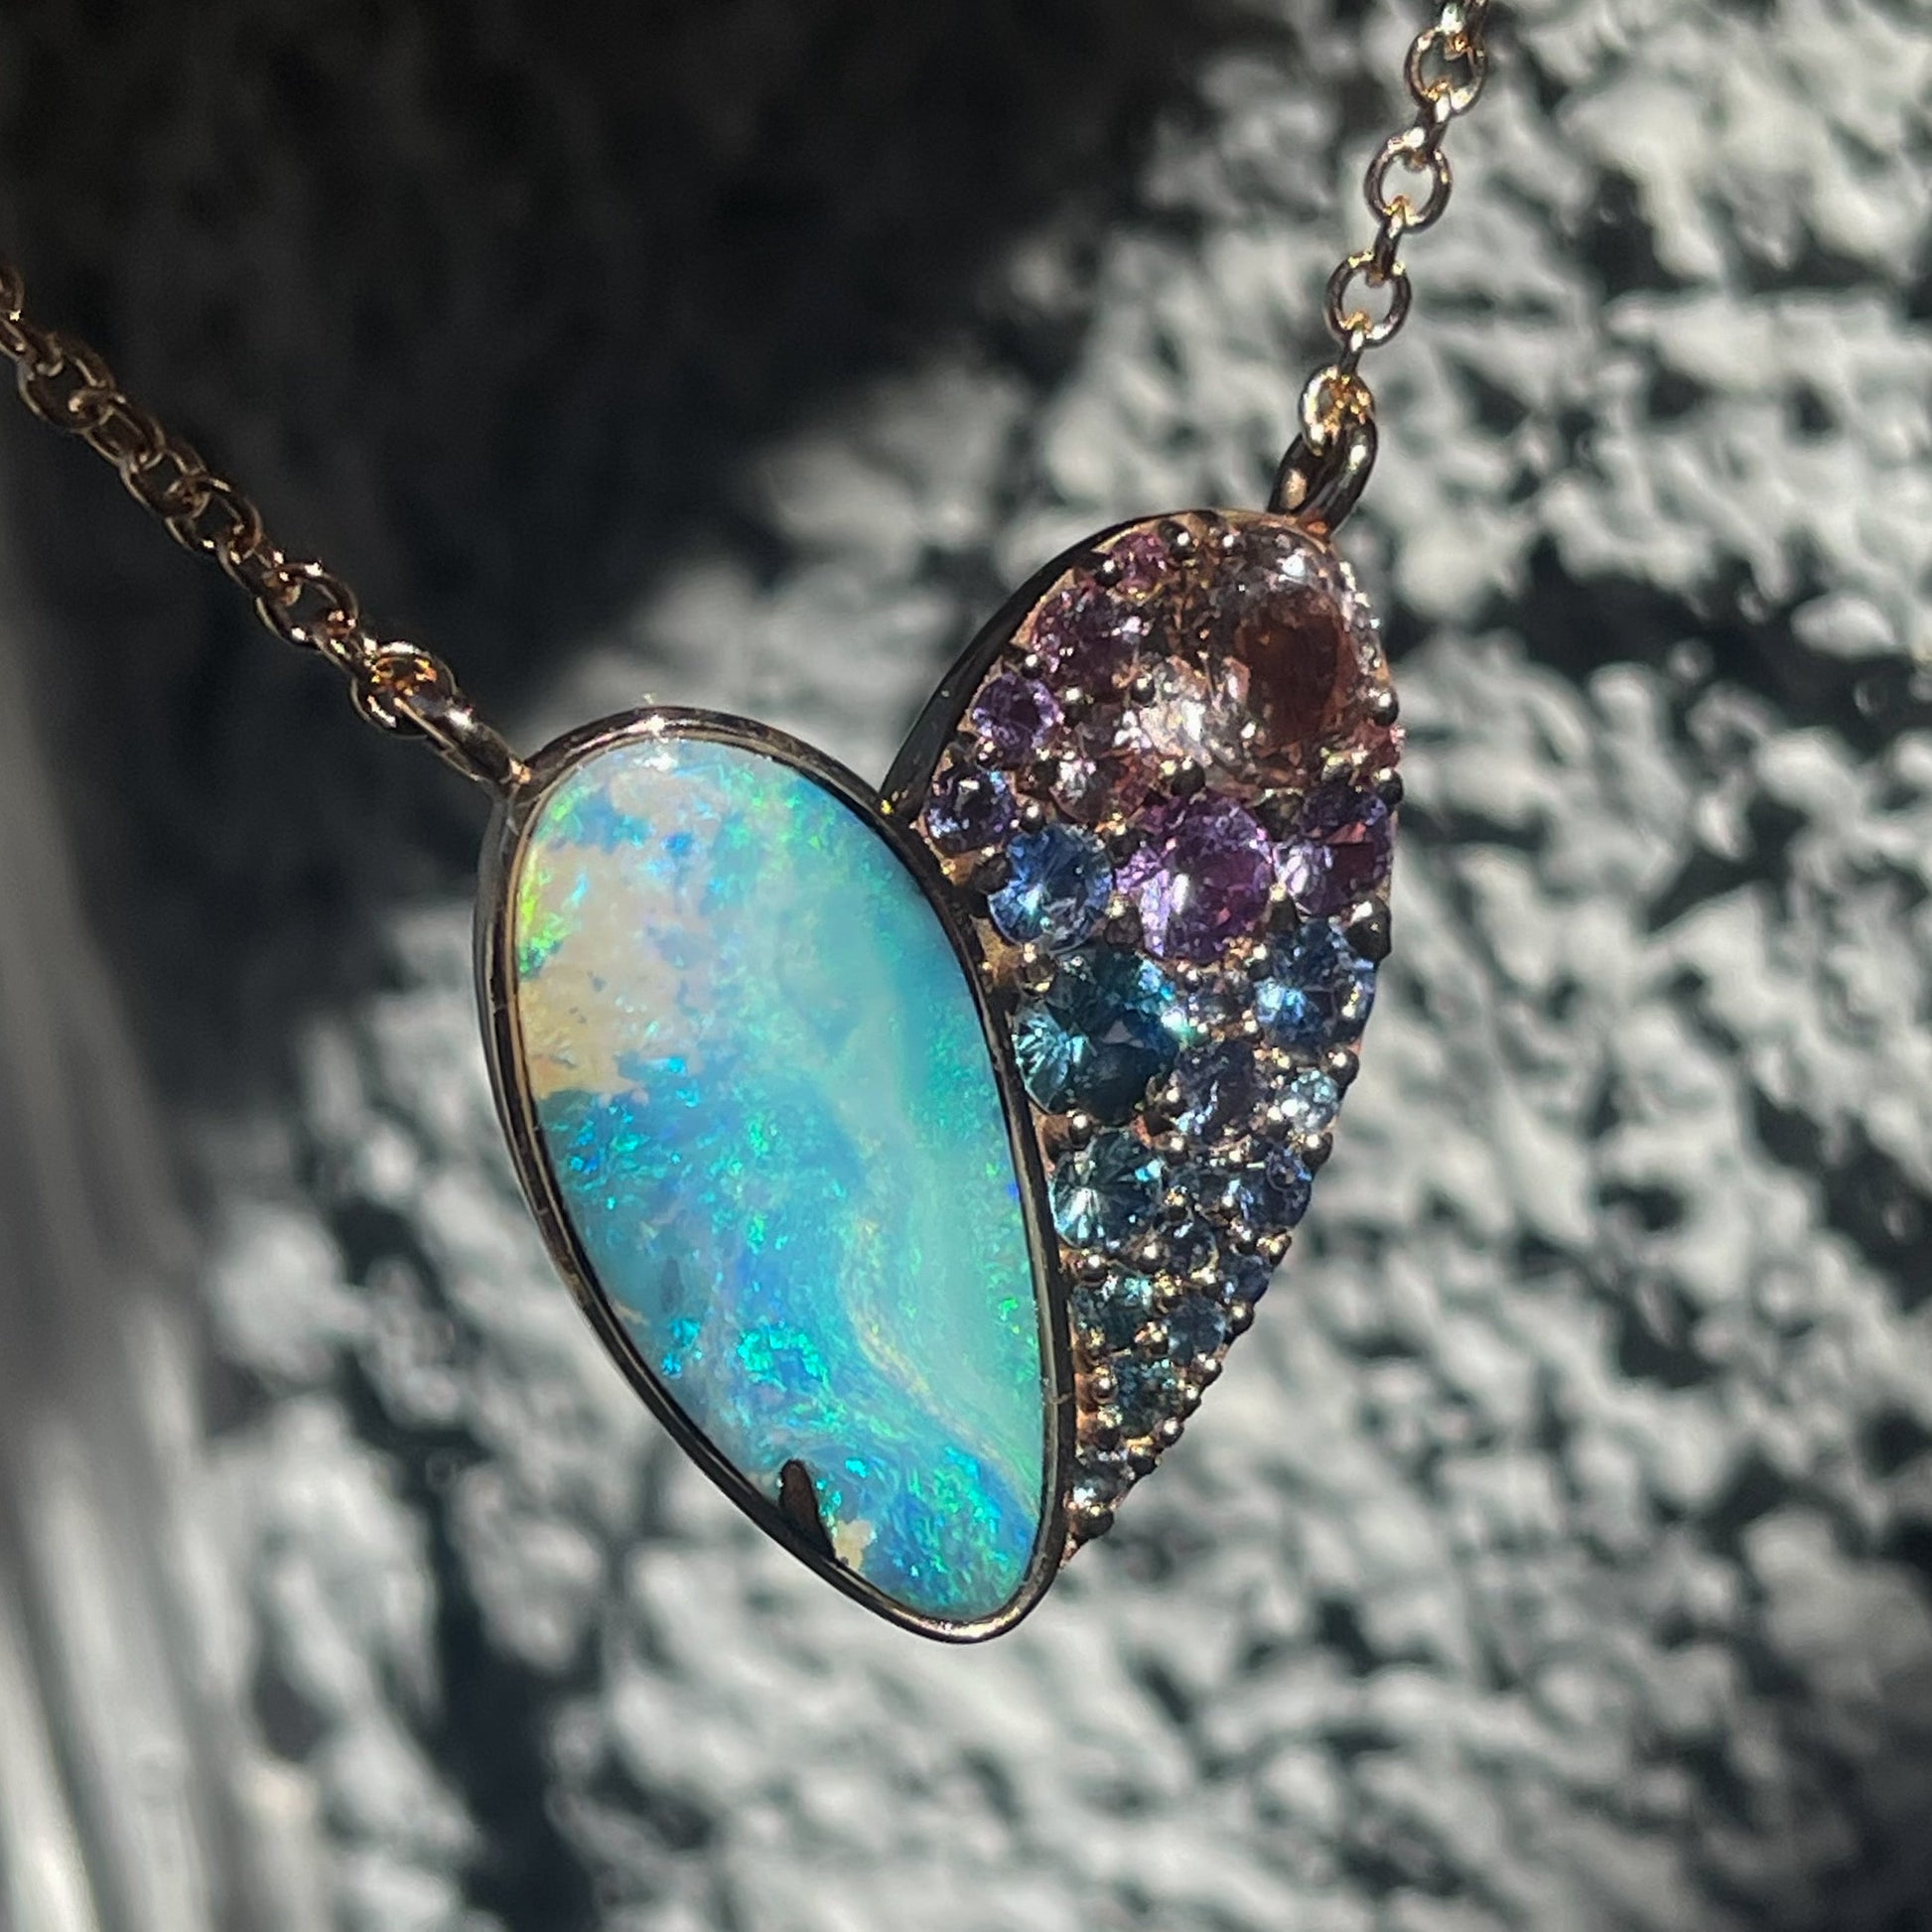 A Heart Opal Necklace by NIXIN Jewelry with a Boulder Opal and sapphires set in rose gold.